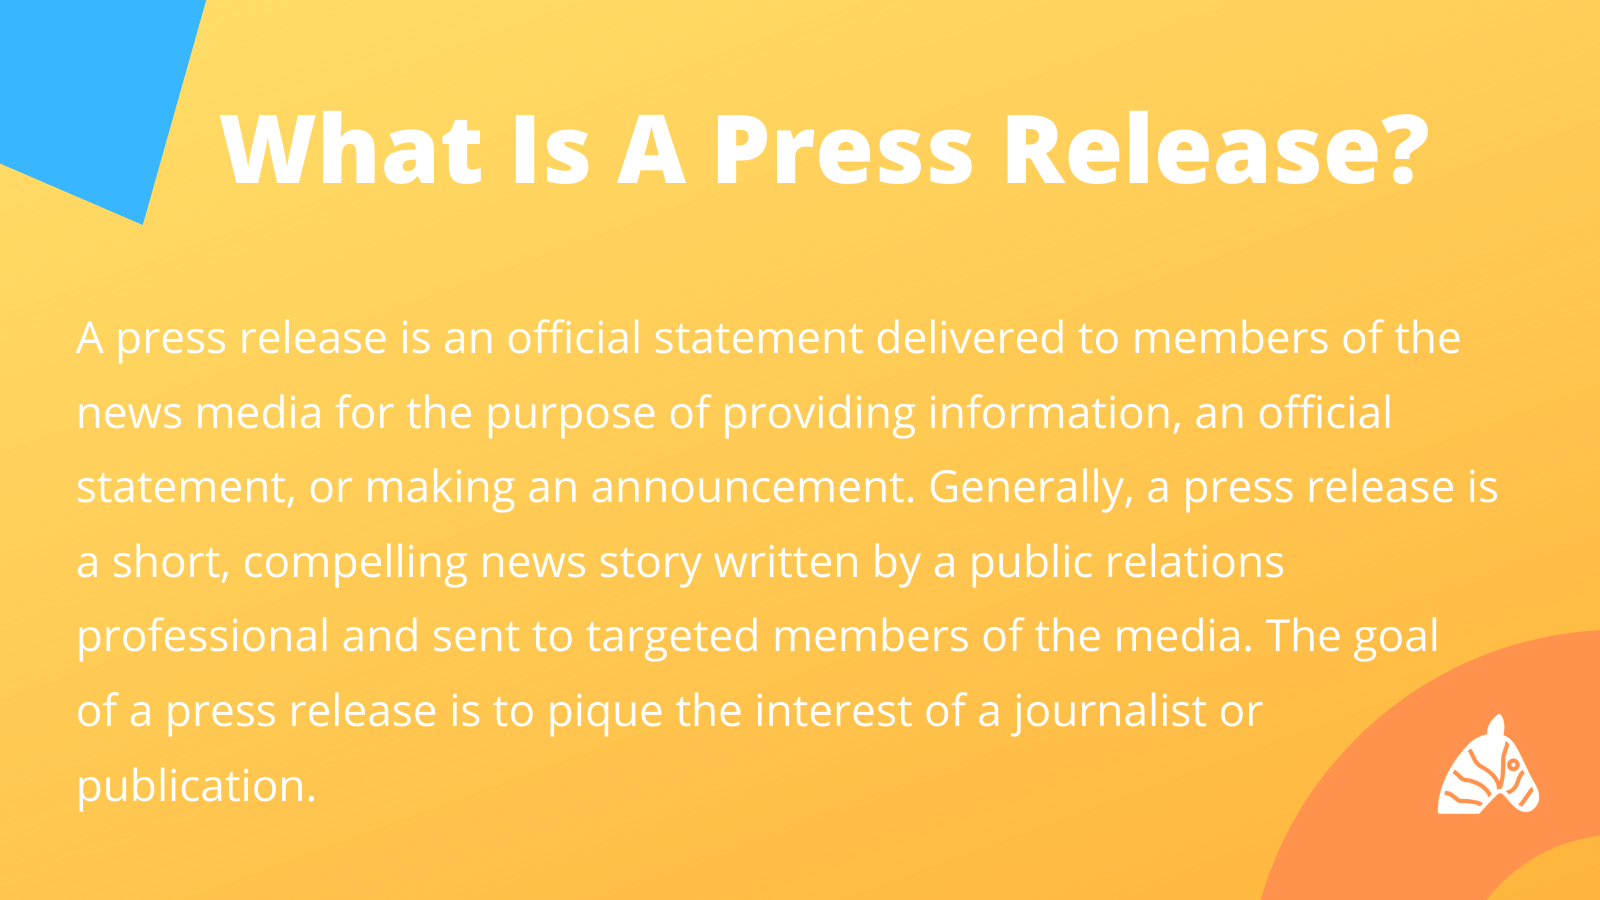 what is a press release?